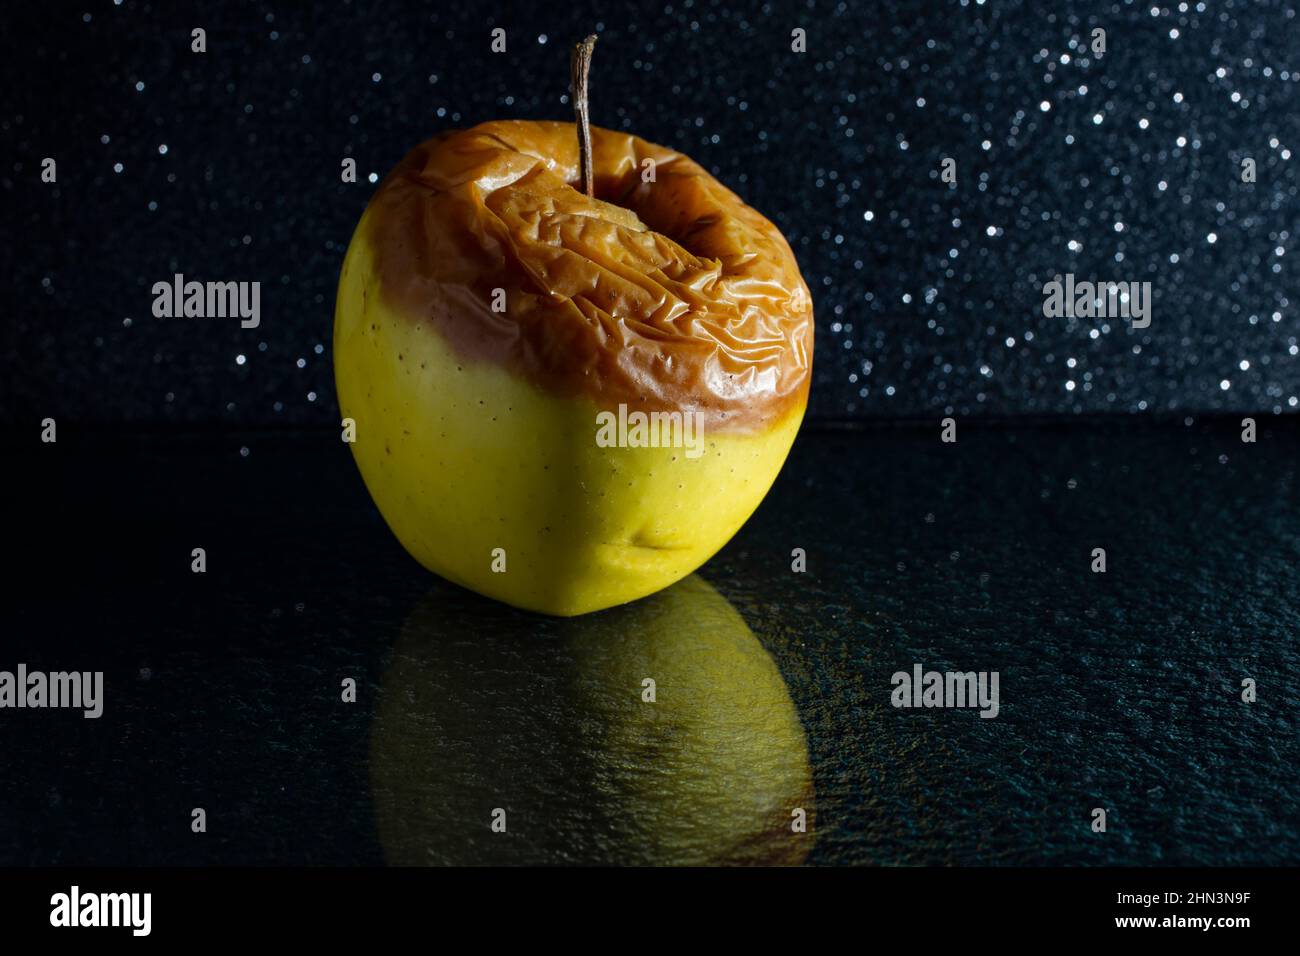 moody portrait of an rotten green  apple, on dark background with glass reflection Stock Photo